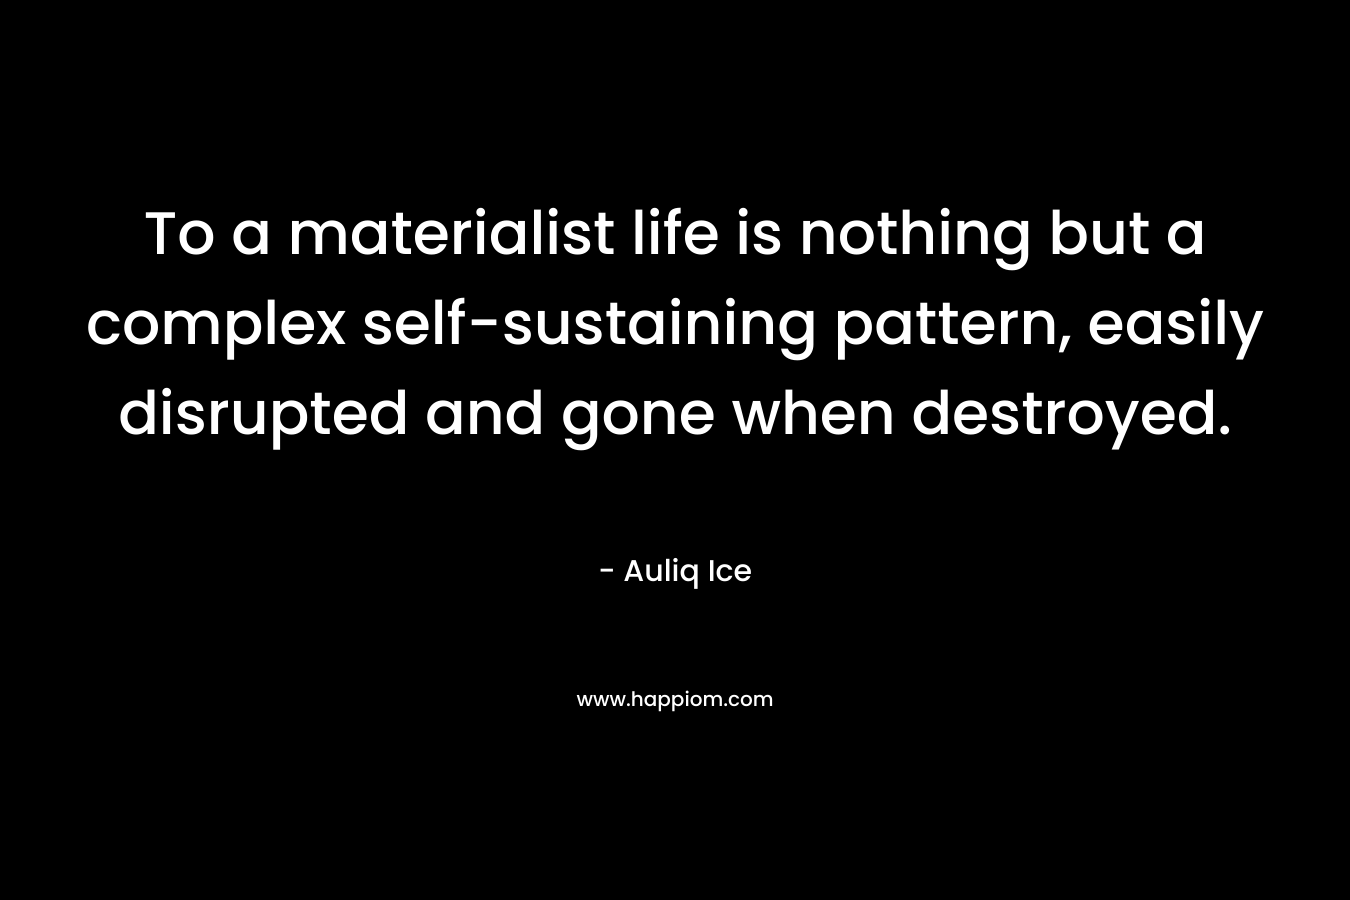 To a materialist life is nothing but a complex self-sustaining pattern, easily disrupted and gone when destroyed. – Auliq Ice